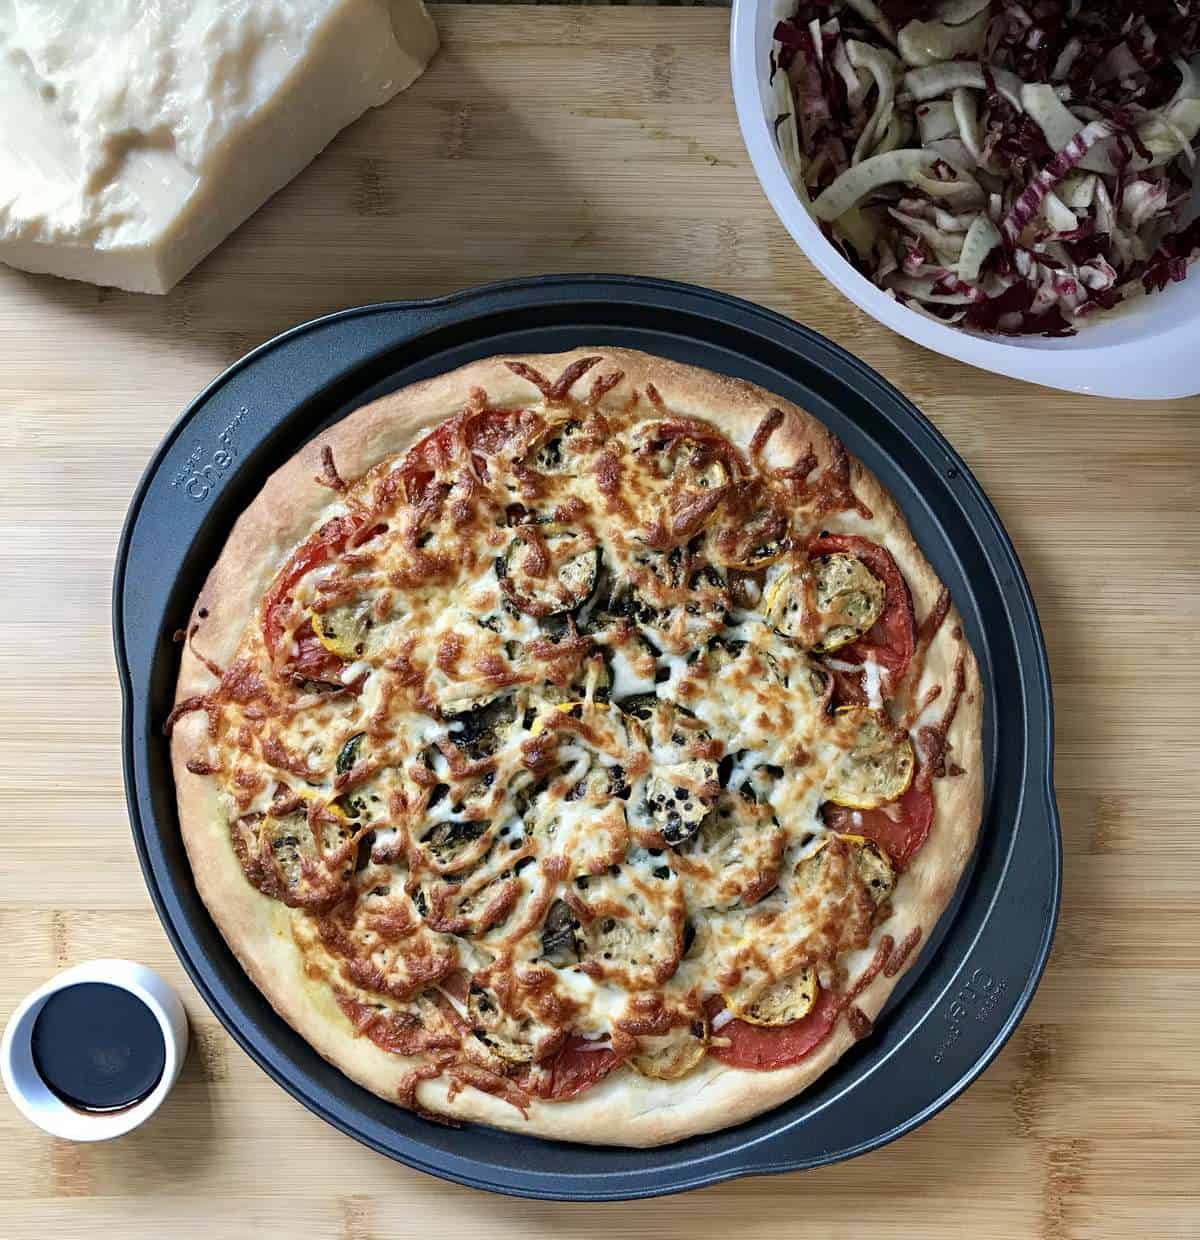 A fresh from the oven vegetarian pizza next to a bowl of endive, radicchio and fennel salad.